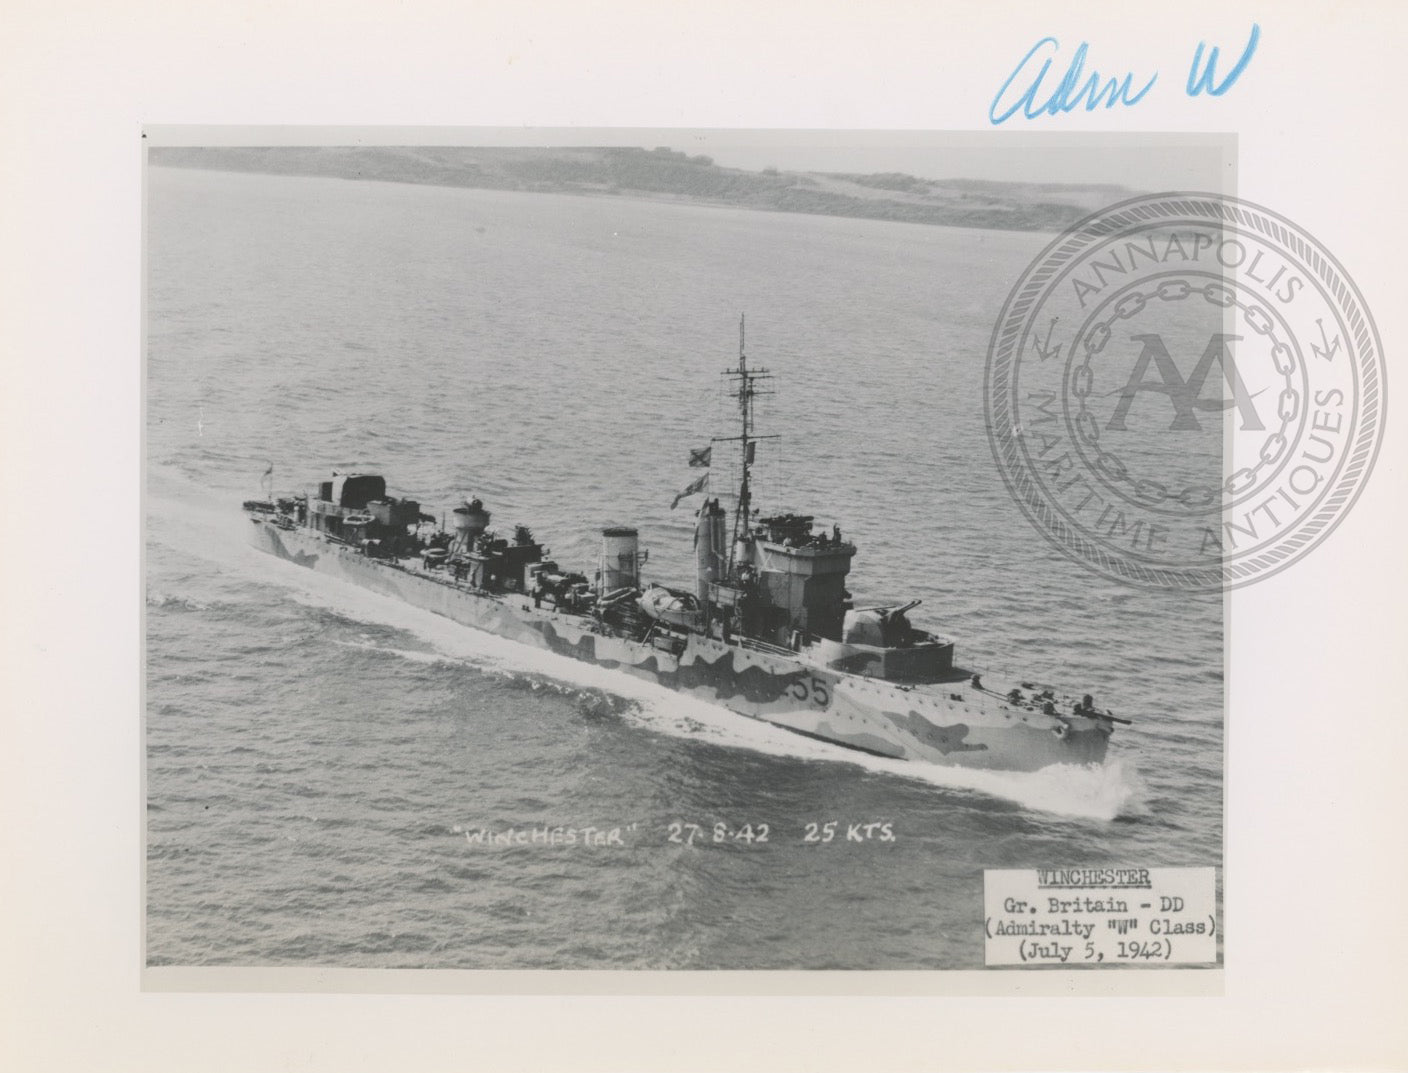 British and Canadian Admiralty "W" Class Destroyers (B)